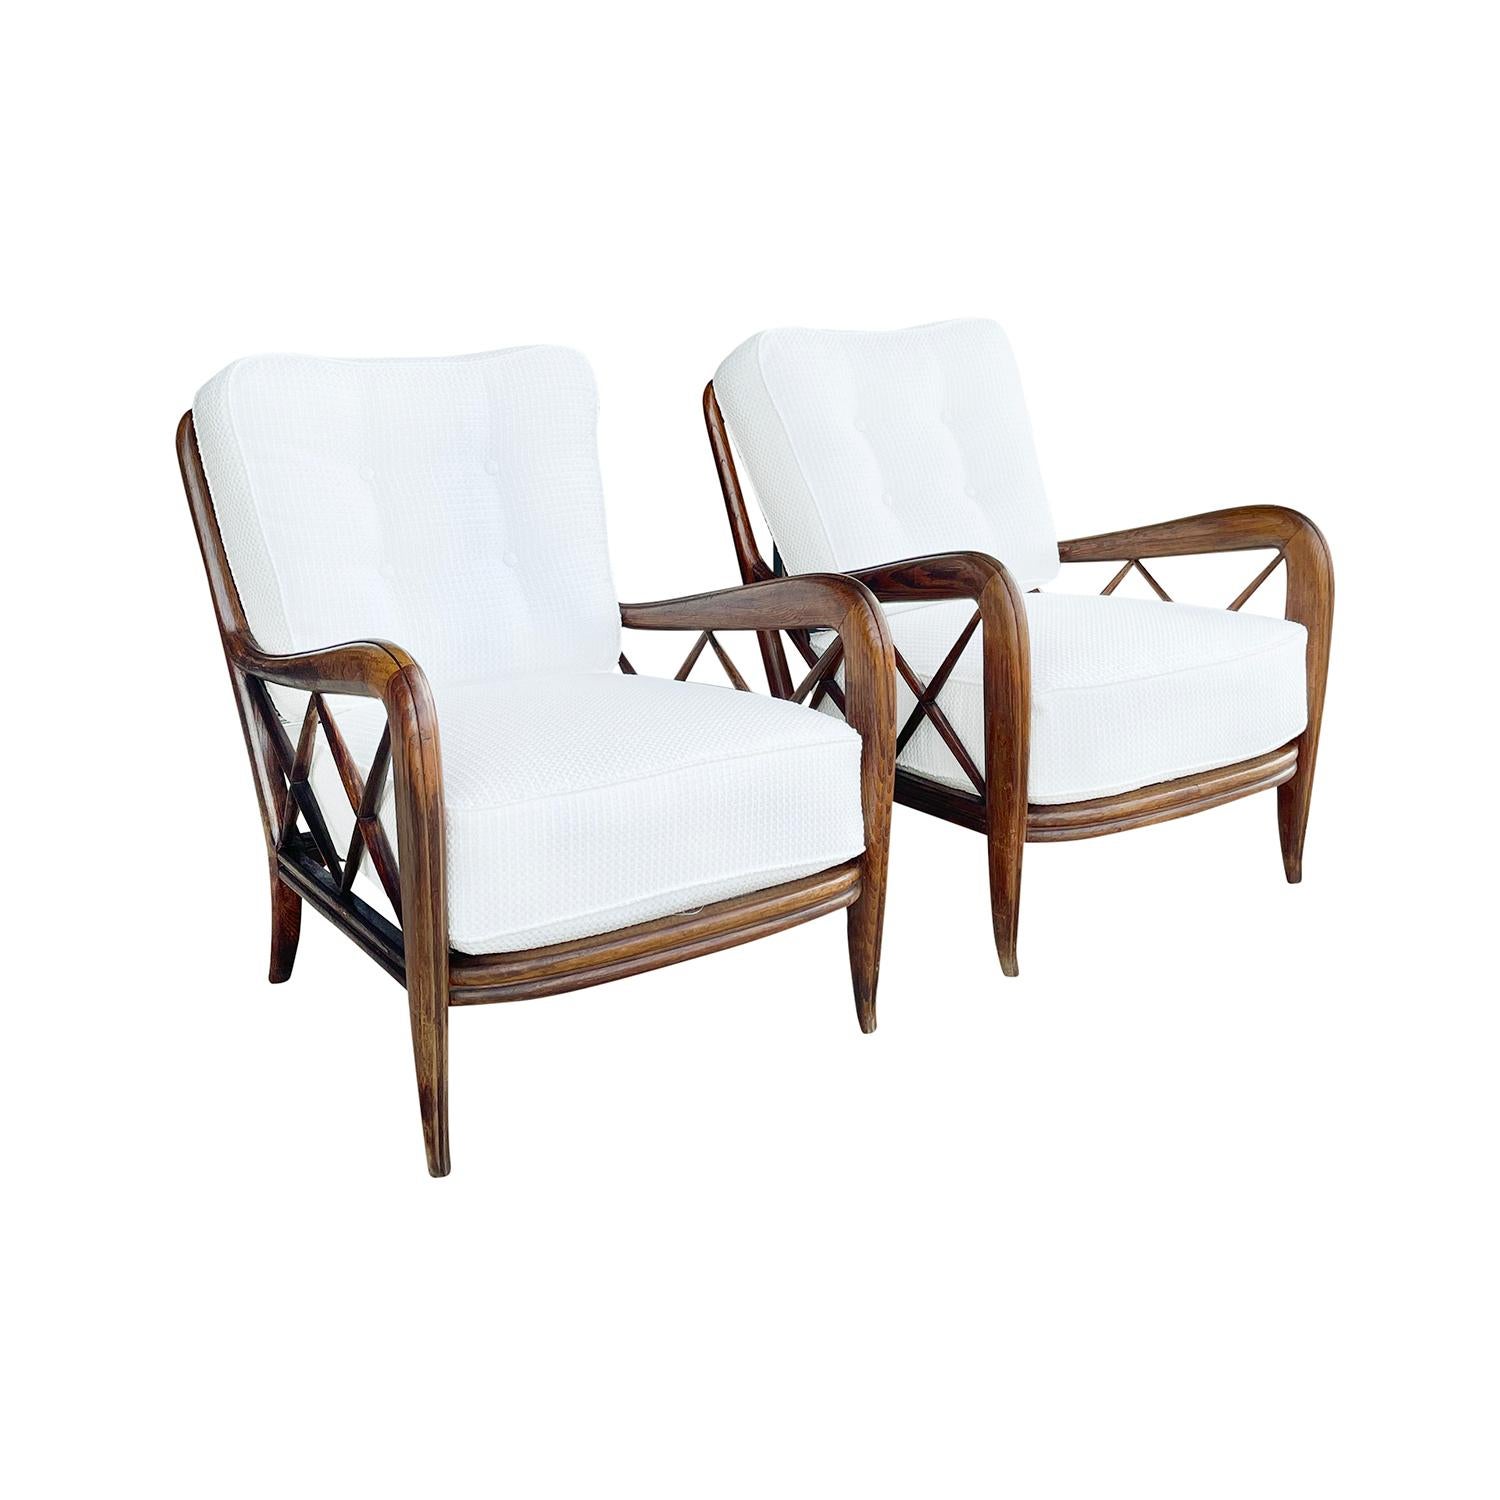 A vintage Mid-Century Modern Italian pair of armchairs made of hand carved beechwood, designed by Paolo Buffa, in good condition. The backrest of the lounge chairs are spindled with x-form slats arms with a button-tufted back cushion, standing on